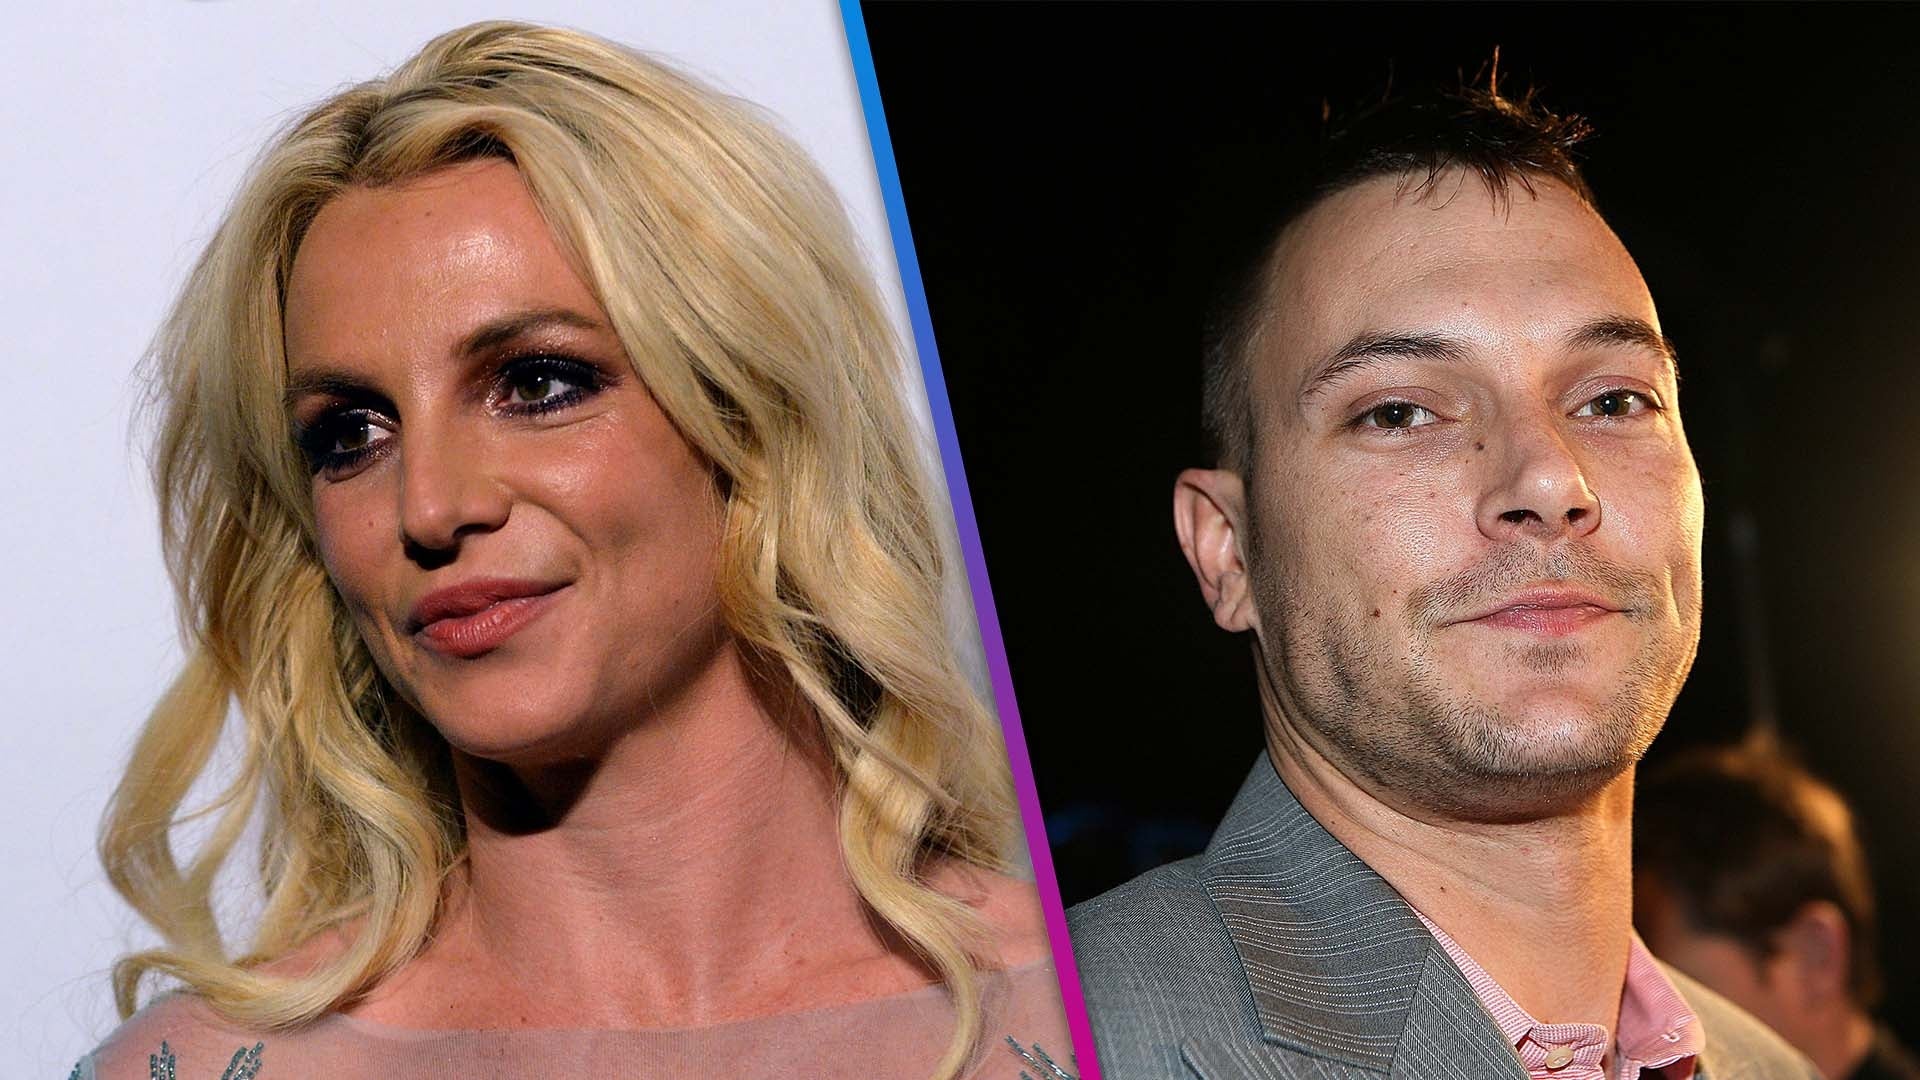 Britney Spears Slams Ex Kevin Federline's New Interview About Their Kids